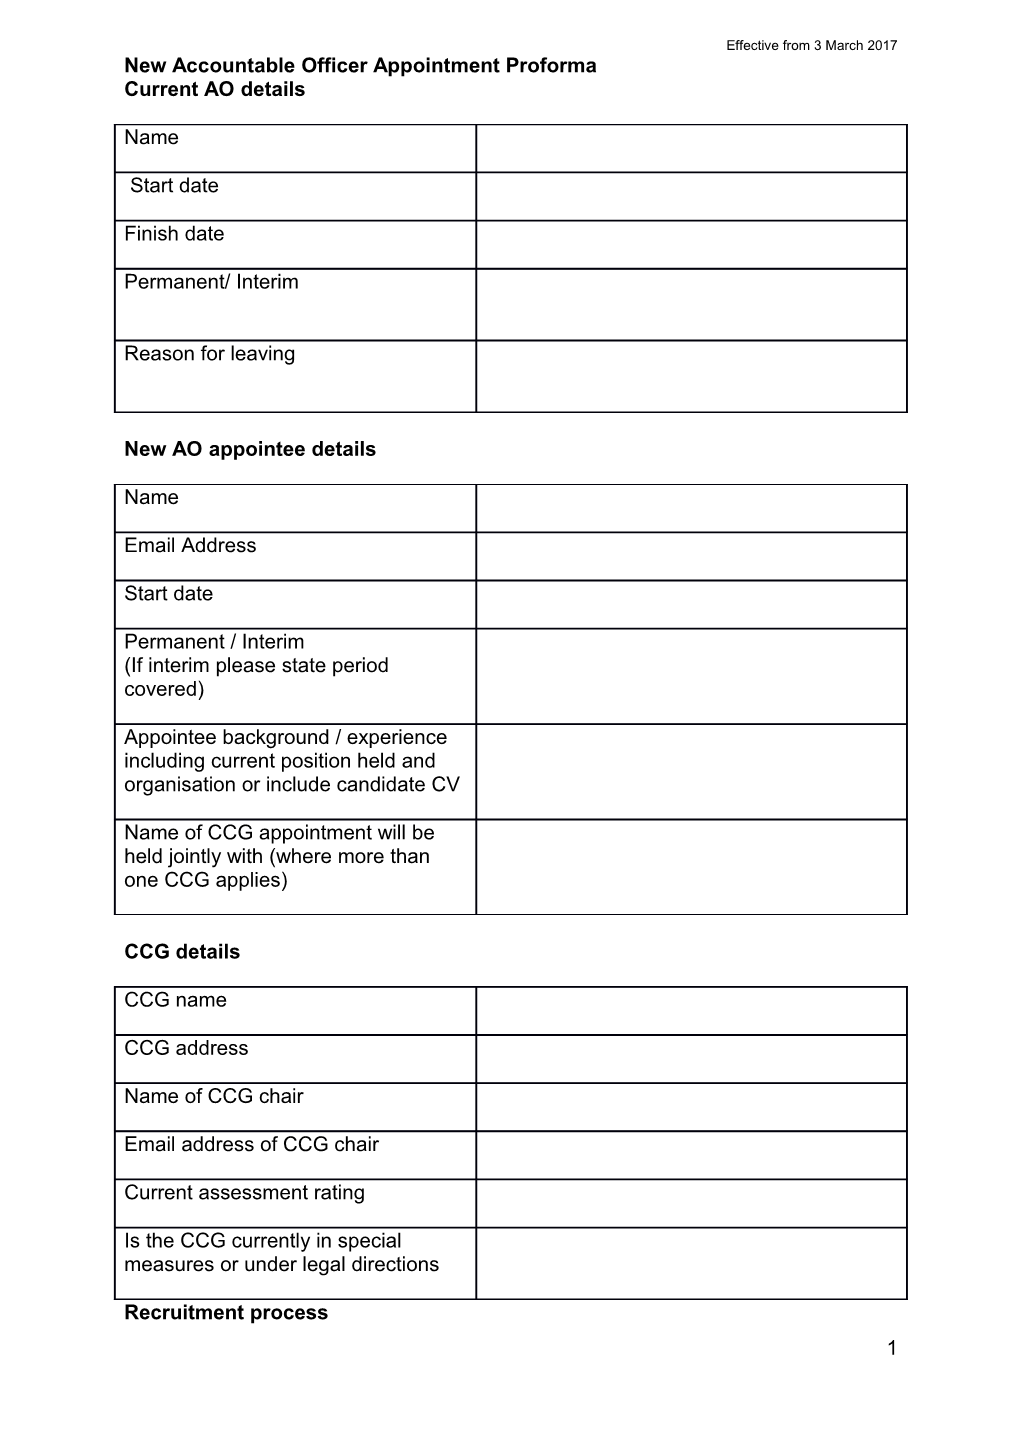 New Accountable Officer Appointment Proforma